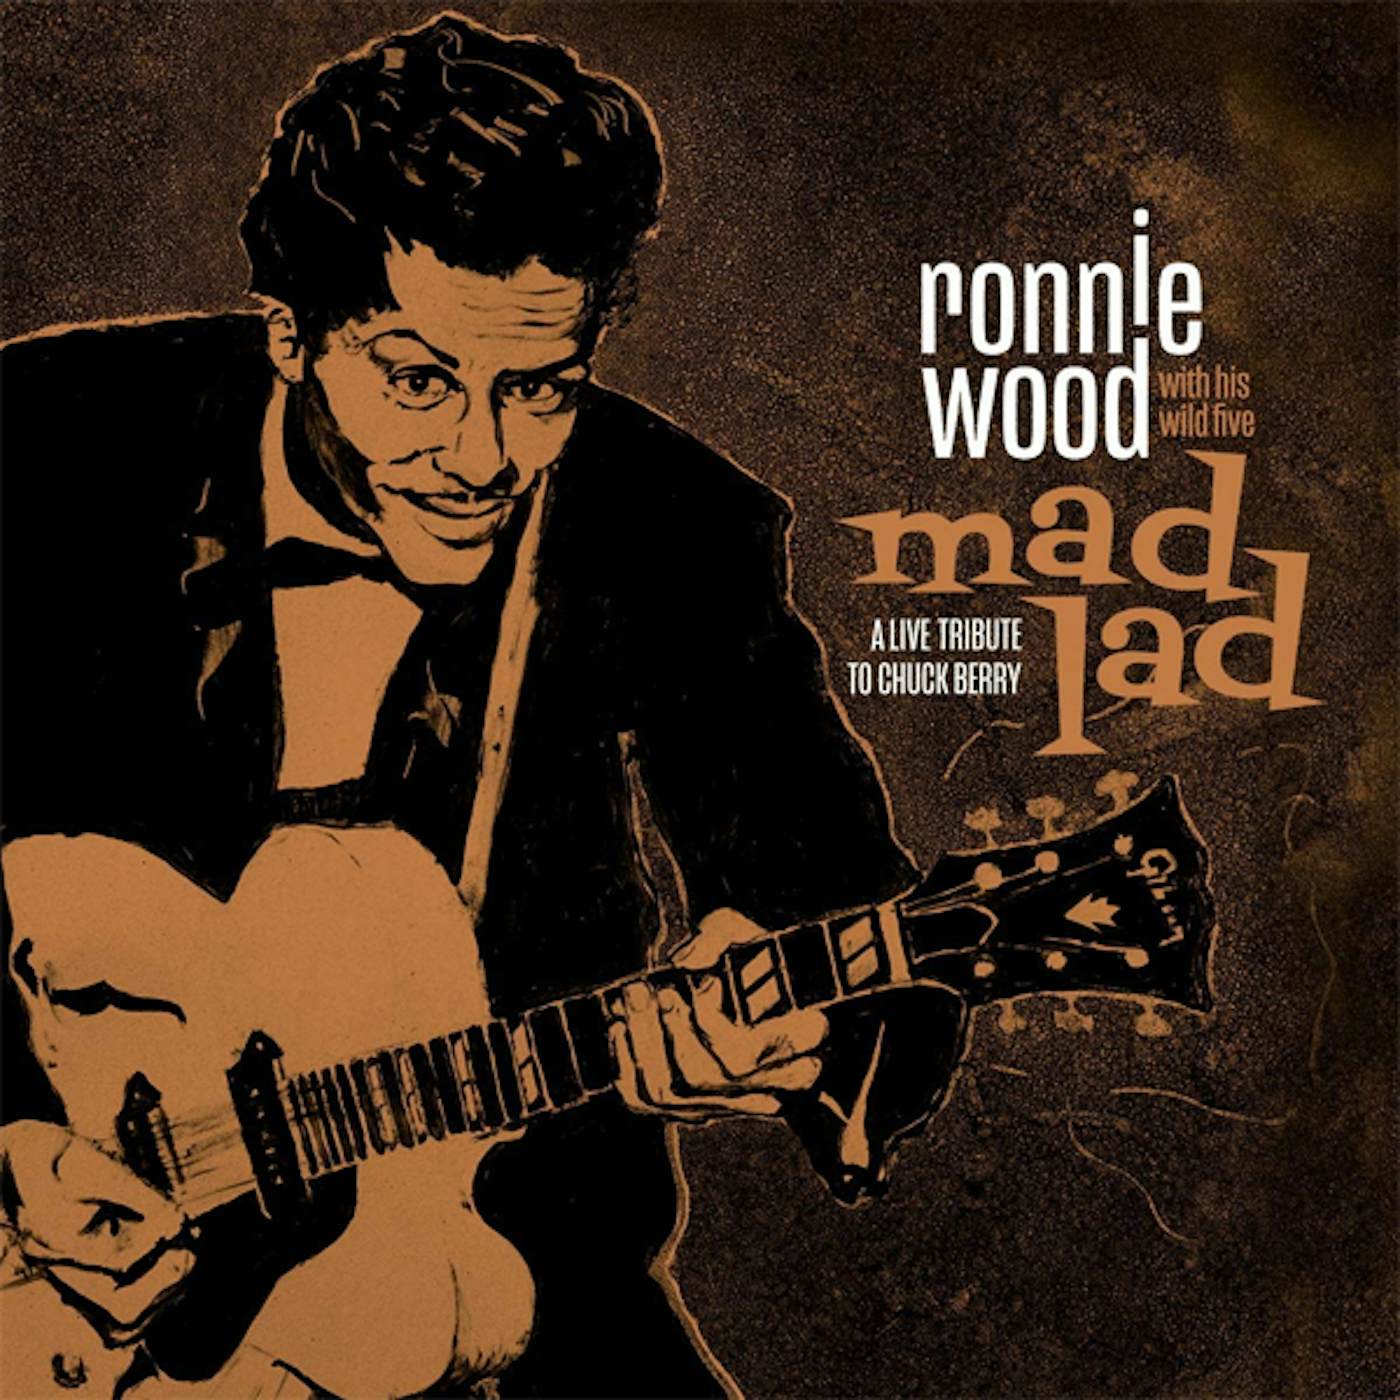 Ronnie Wood & His Wild Five MAD LAD: A LIVE TRIBUTE TO CHUCK BERRY (DELUXE EDITION) Vinyl Record